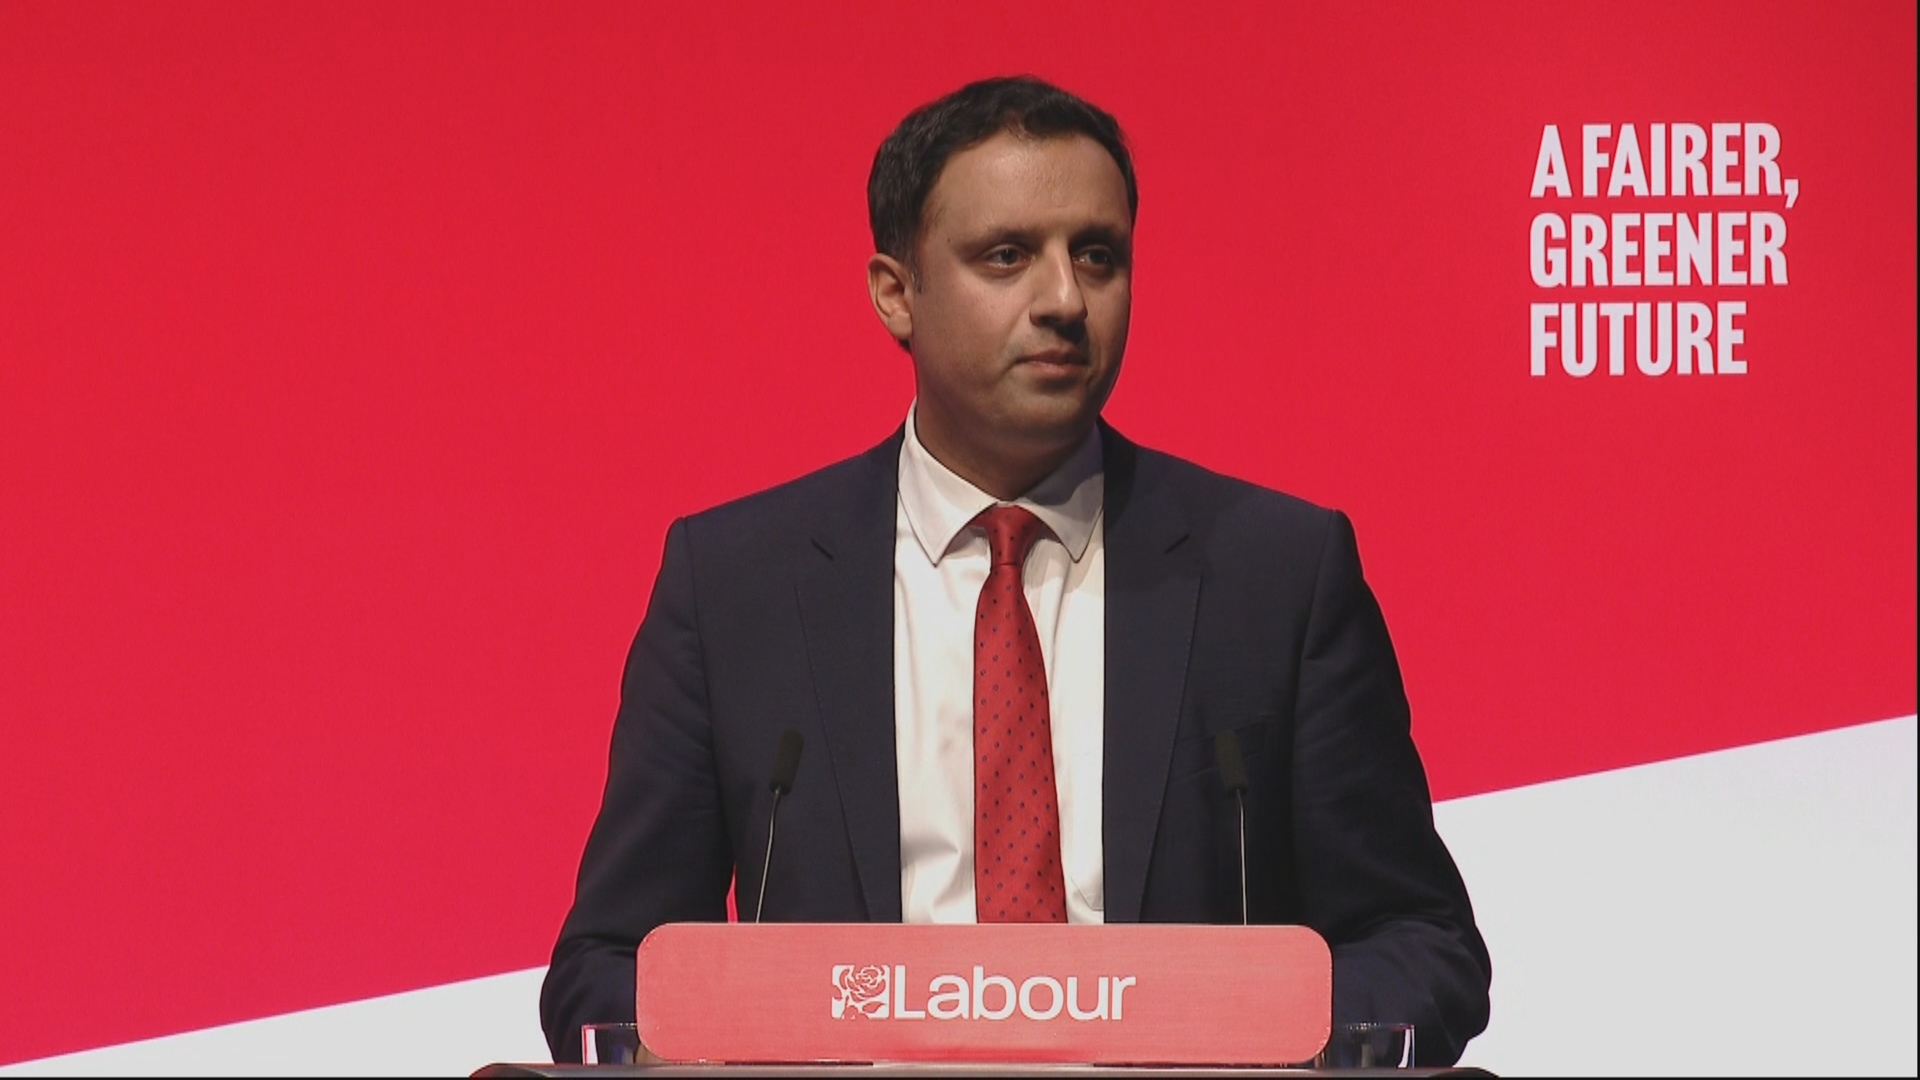 Anas Sarwar said the route to the UK Labour government is through Scotland.